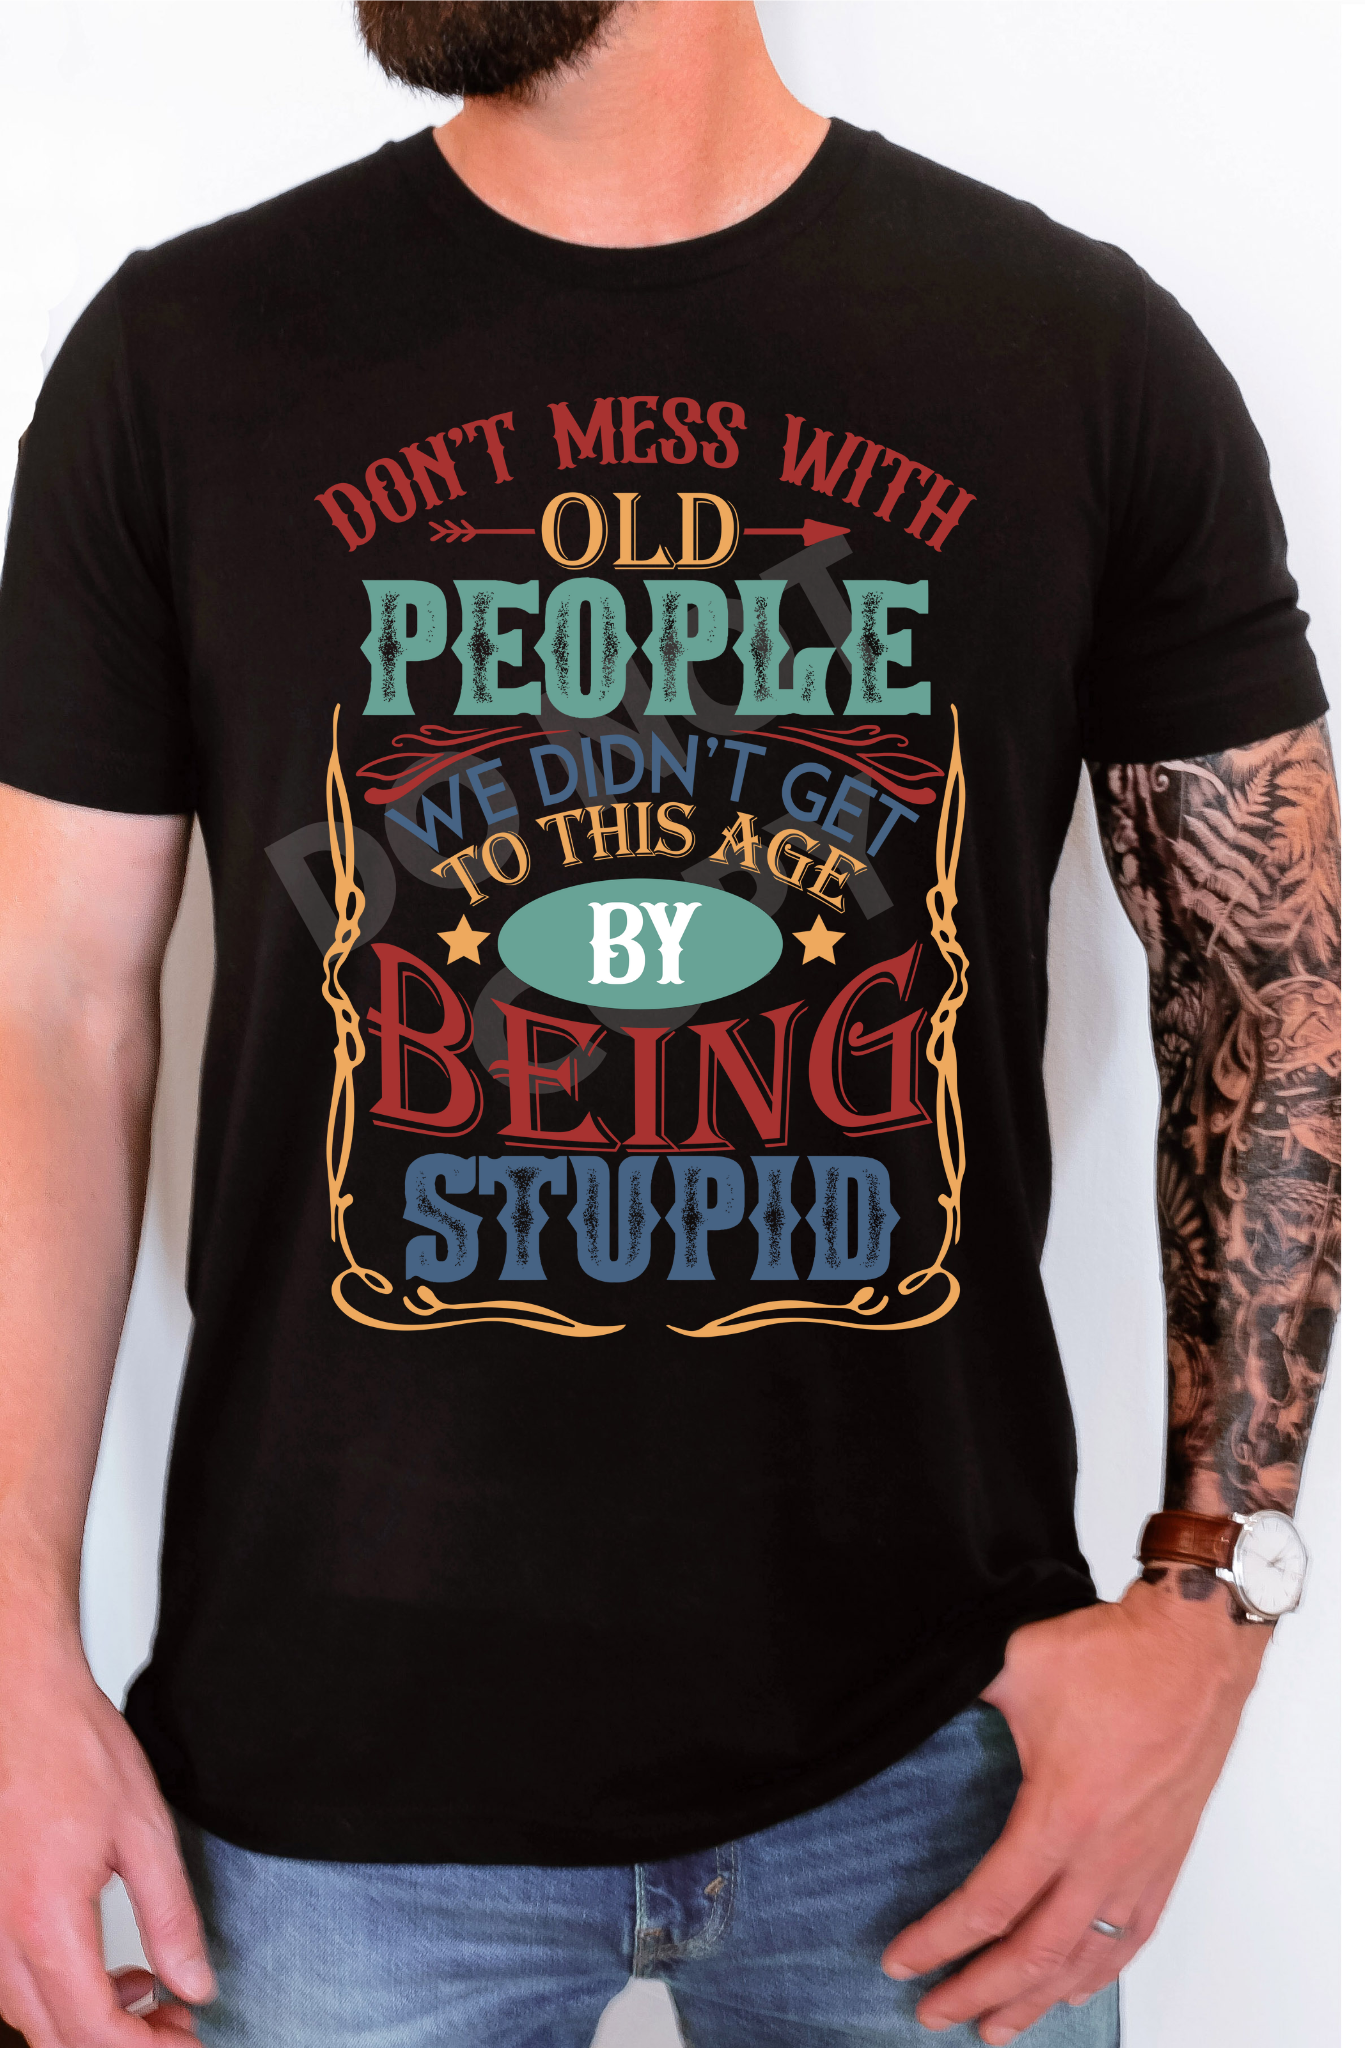 DONT MESS WITH OLD PEOPLE TEE